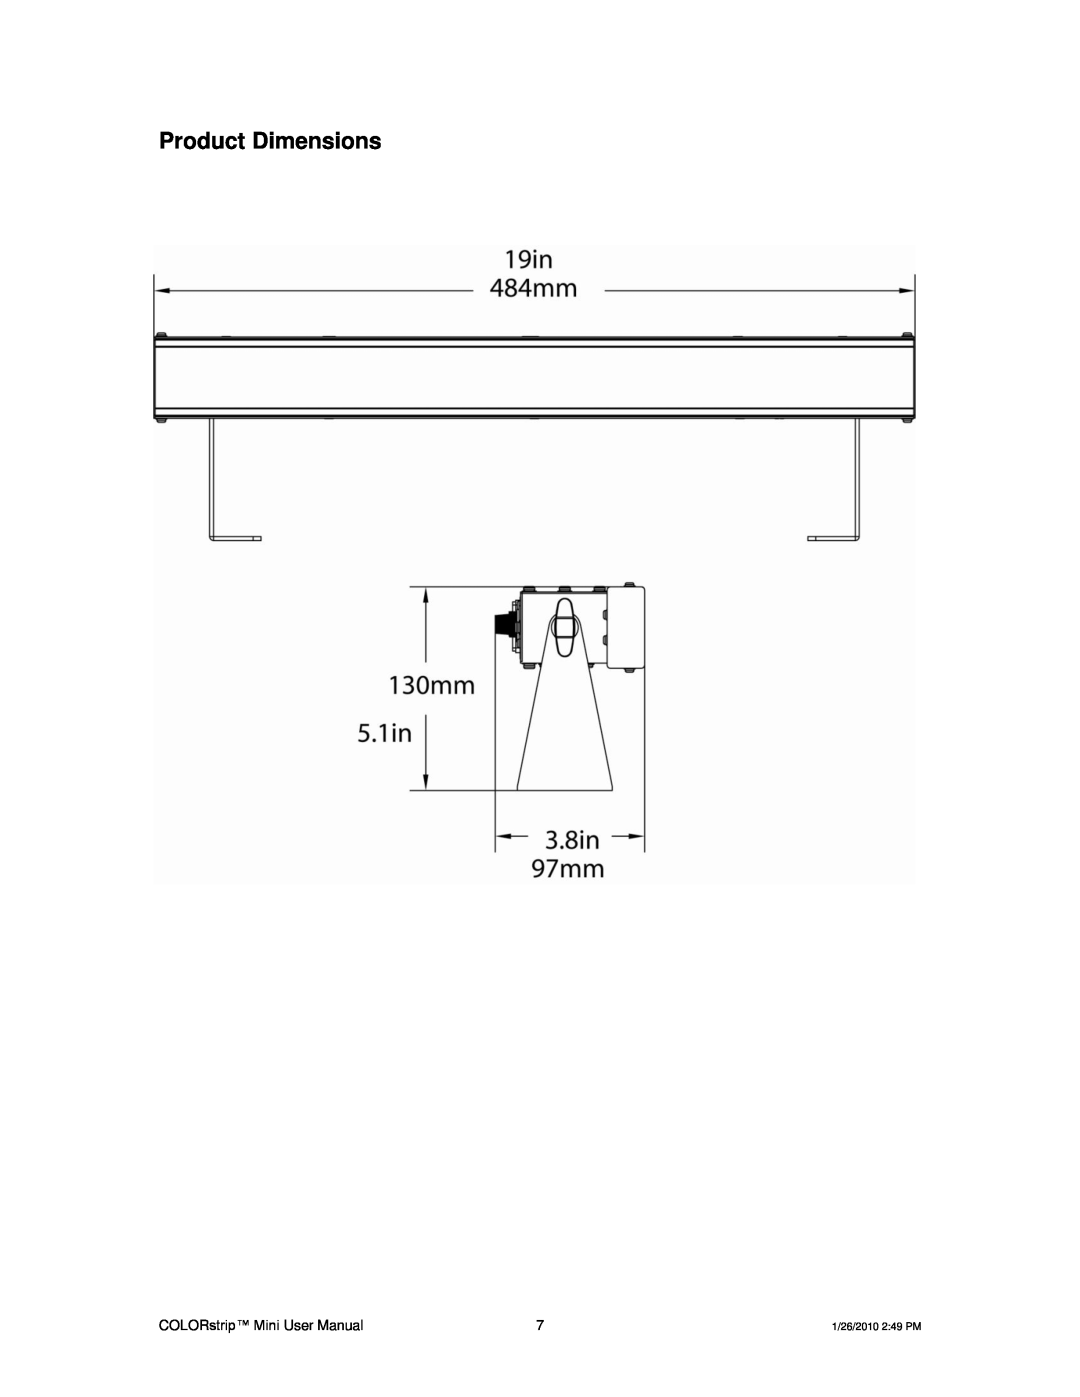 Chauvet Indoor Furnishings user manual Product Dimensions 